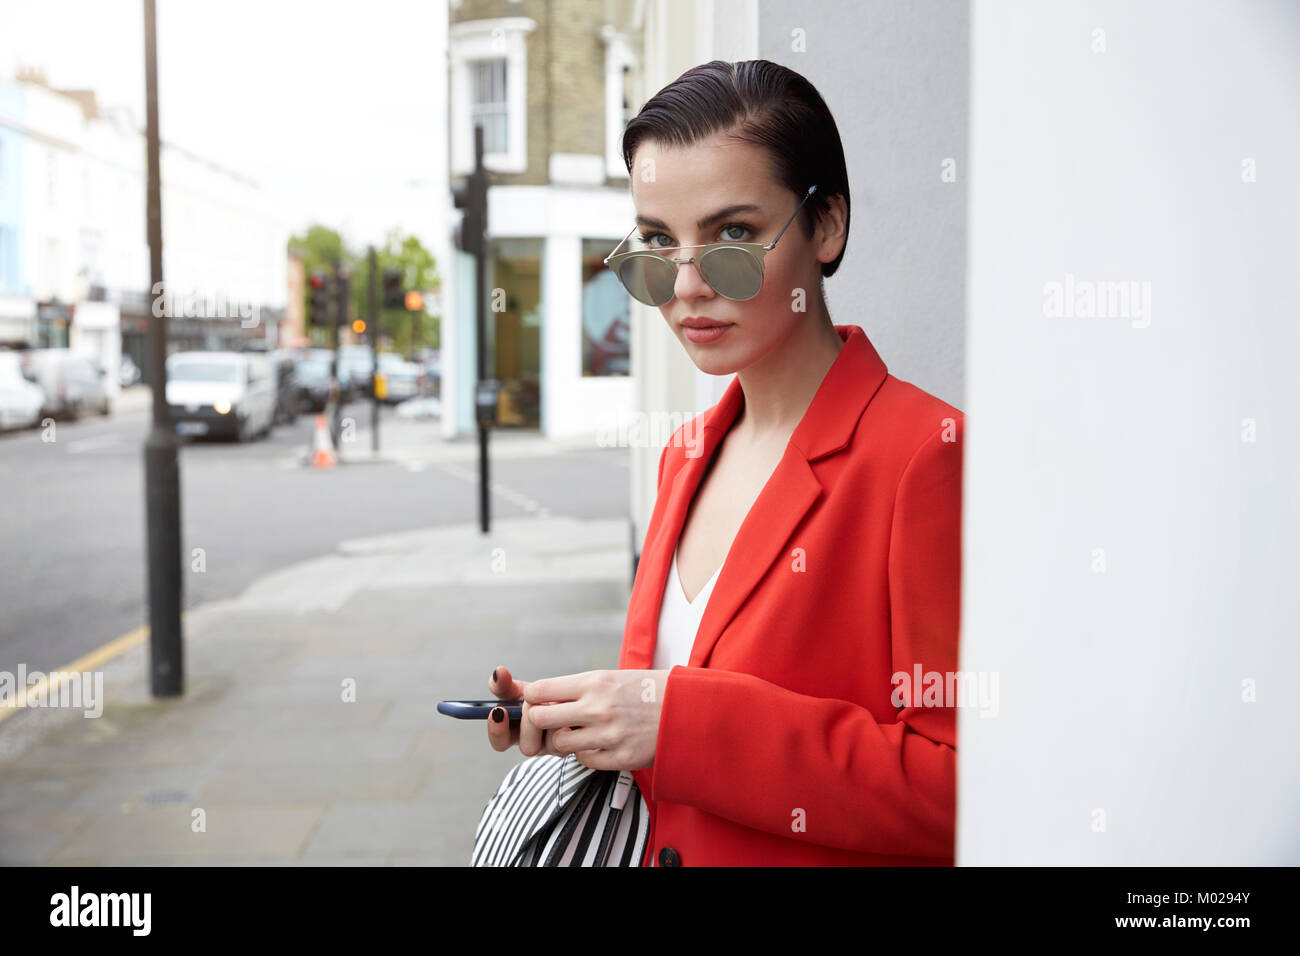 Woman in red jacket on the street, looking over sunglasses Stock Photo